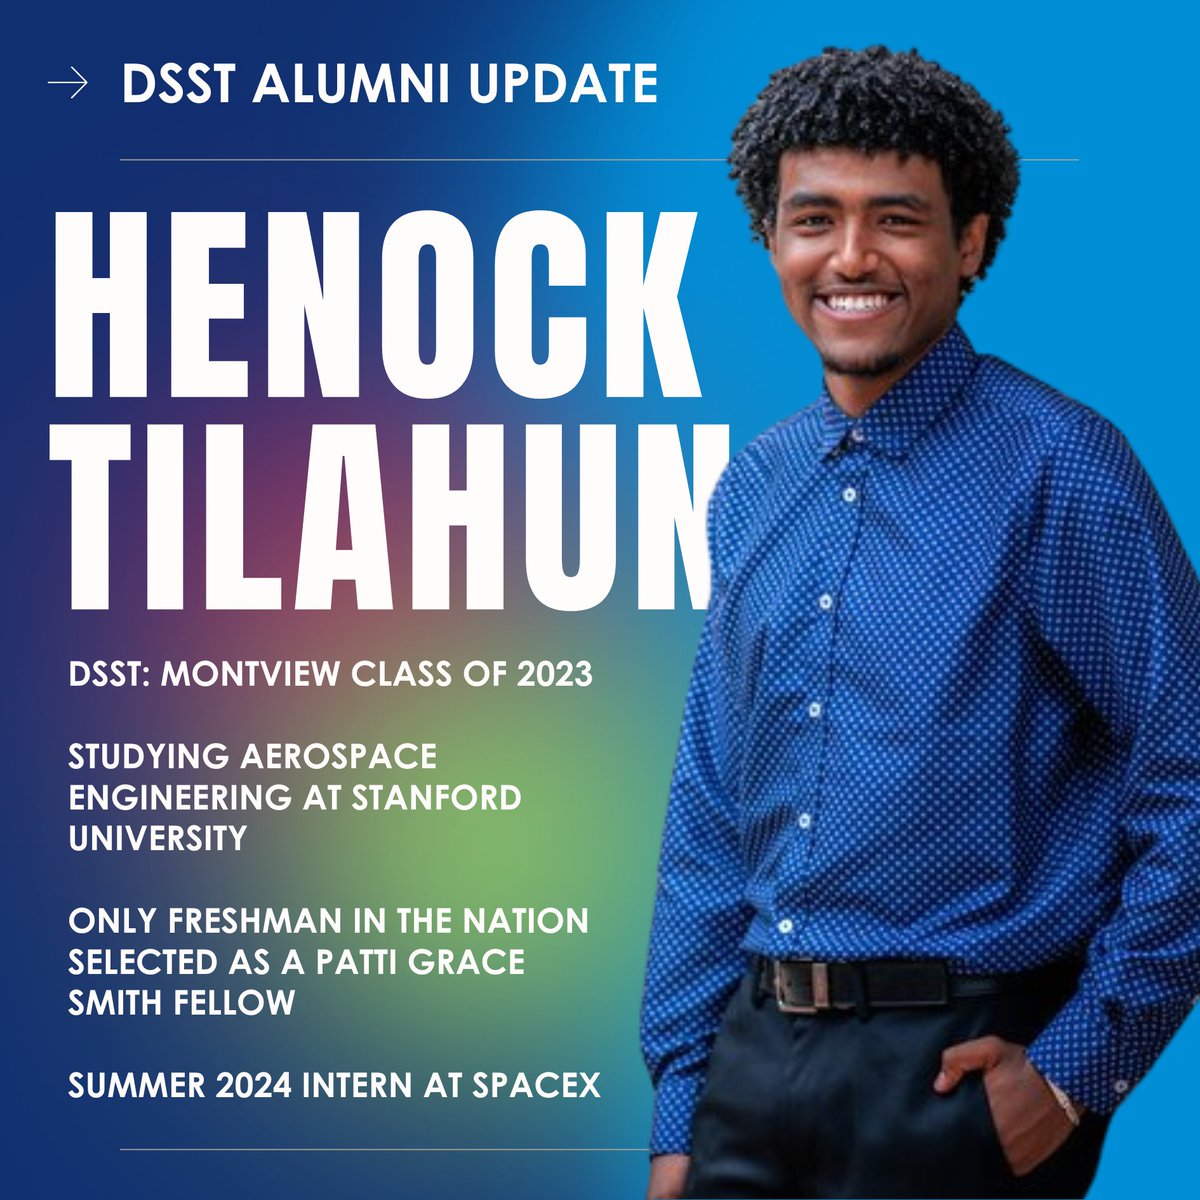 Alumni Update! 🚨Henock Tilahun (DSST: Montview '23, Stanford '27) was selected for the @PGSFellowship ! 🚀 He's the sole first-year student among 29 nationwide chosen for the program, securing a SpaceX internship, mentors, and a $2,500 grant! 👏🏾#DSSTAlum